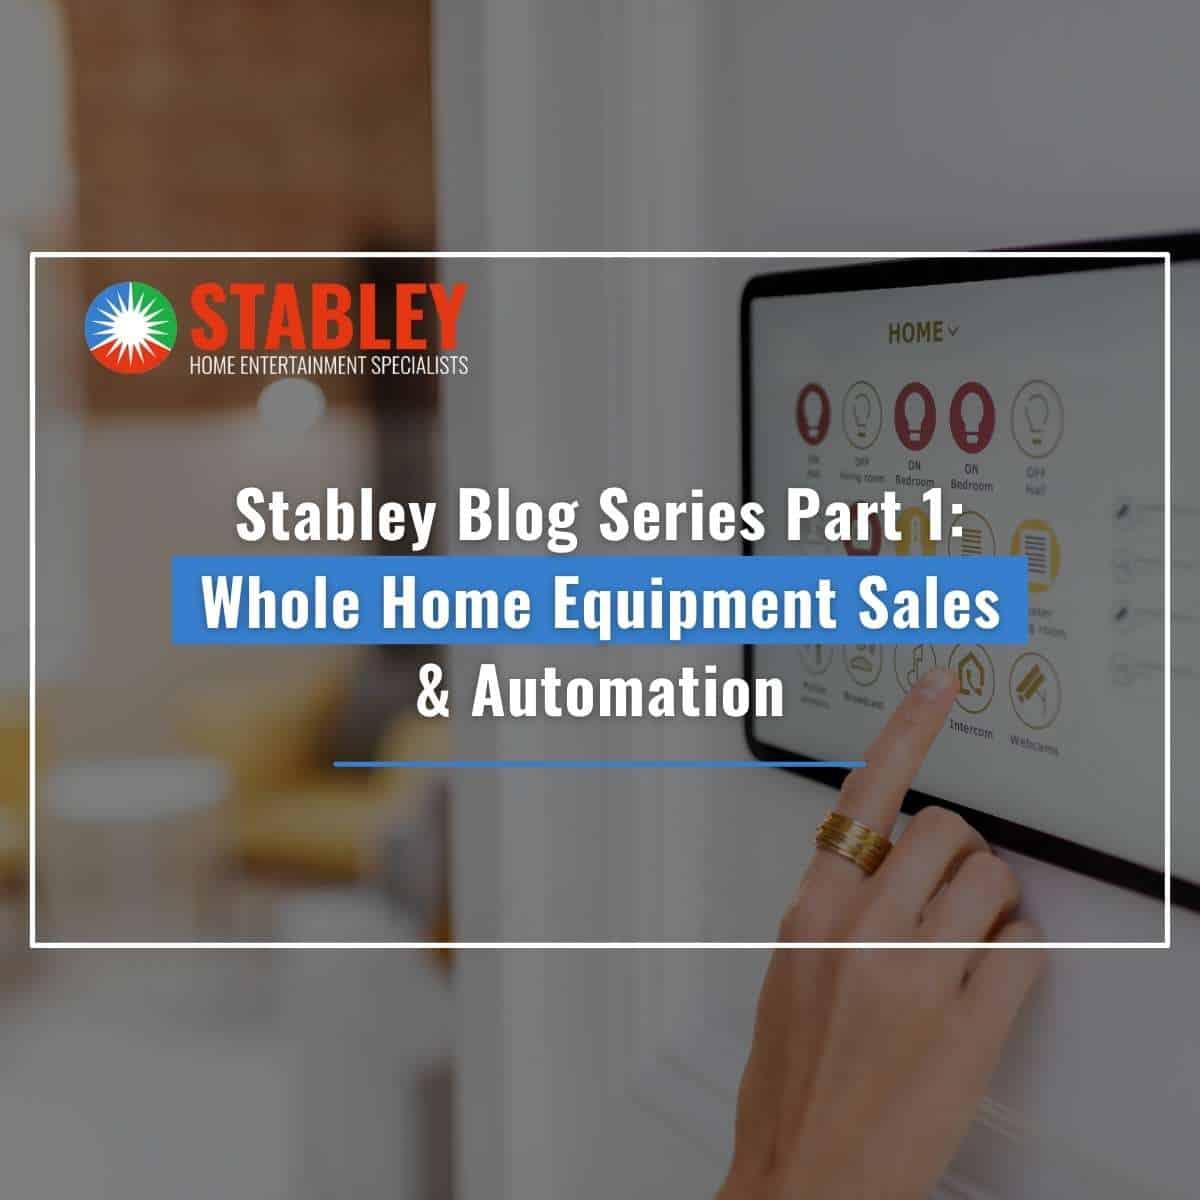 Stabley Blog Series Part 1: Whole Home Equipment Sales & Automation